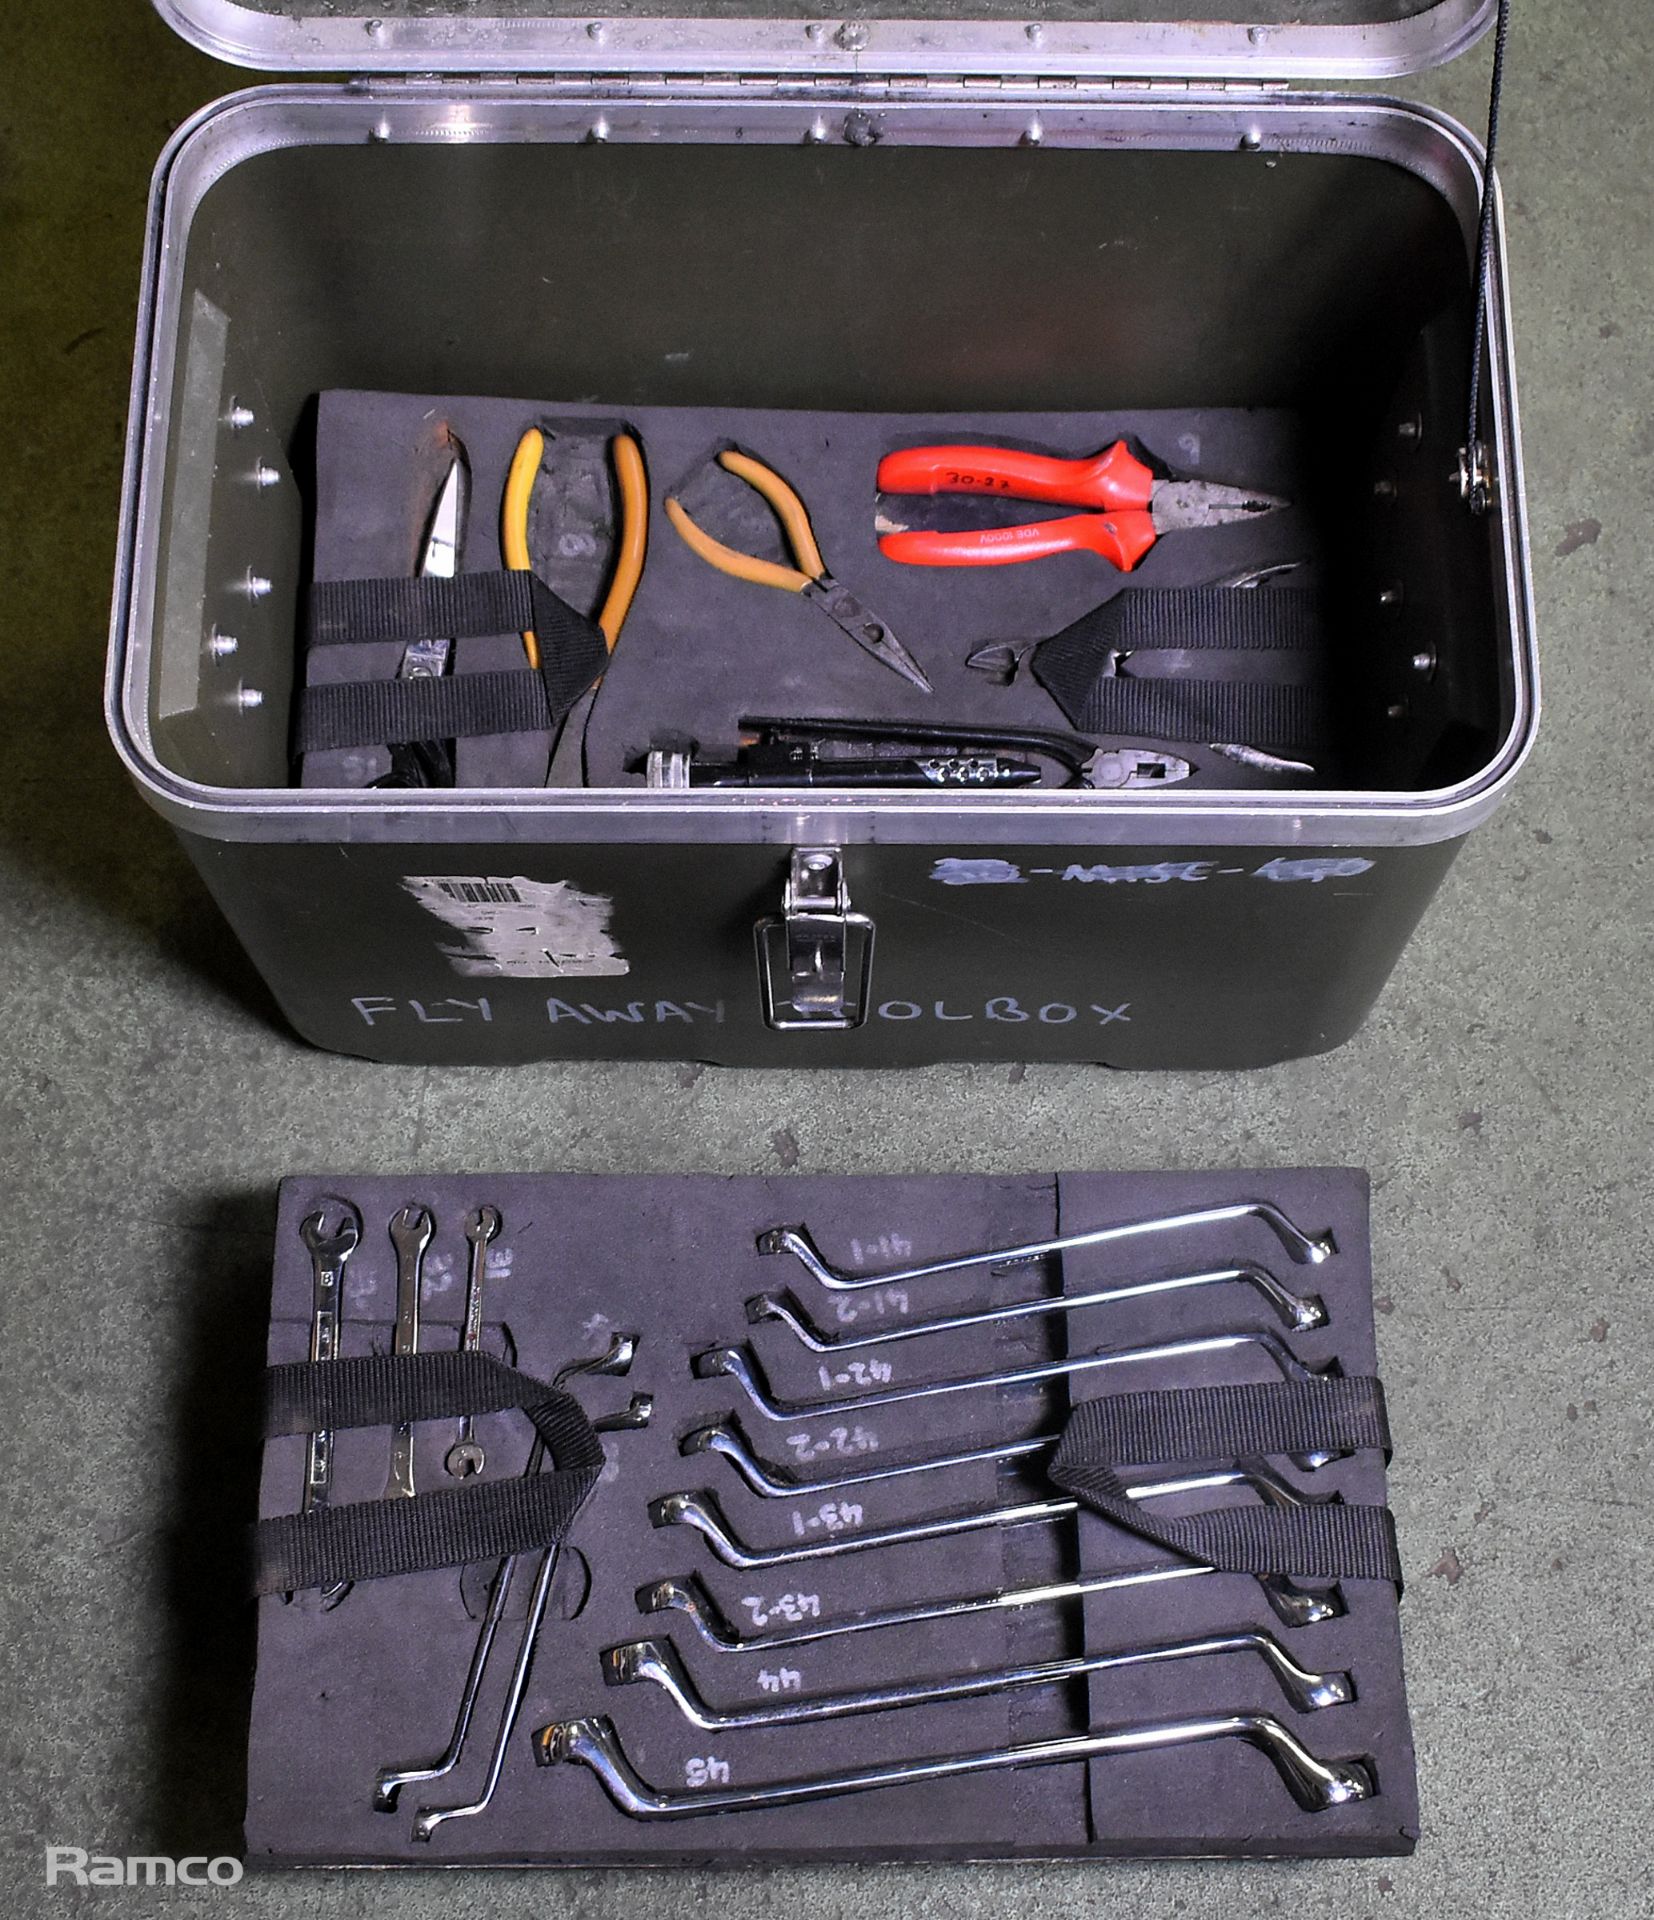 Multiple piece tool kit in foam trays - spanners, screwdrivers, hammers, pliers - Image 12 of 15